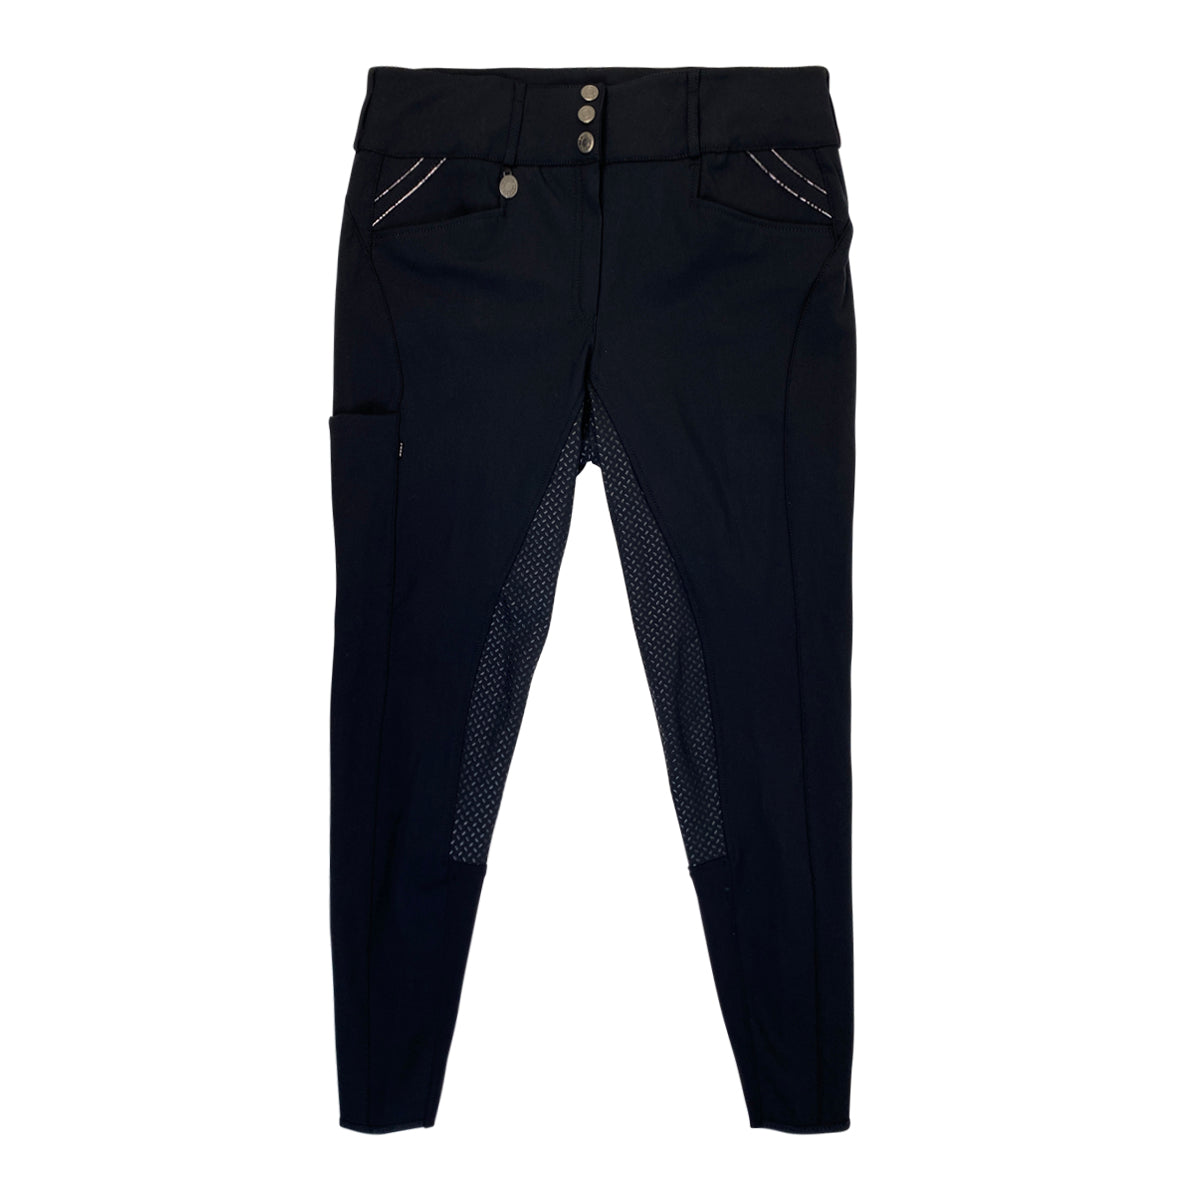 Pikeur 'Candela Glamour' Breeches in Black 